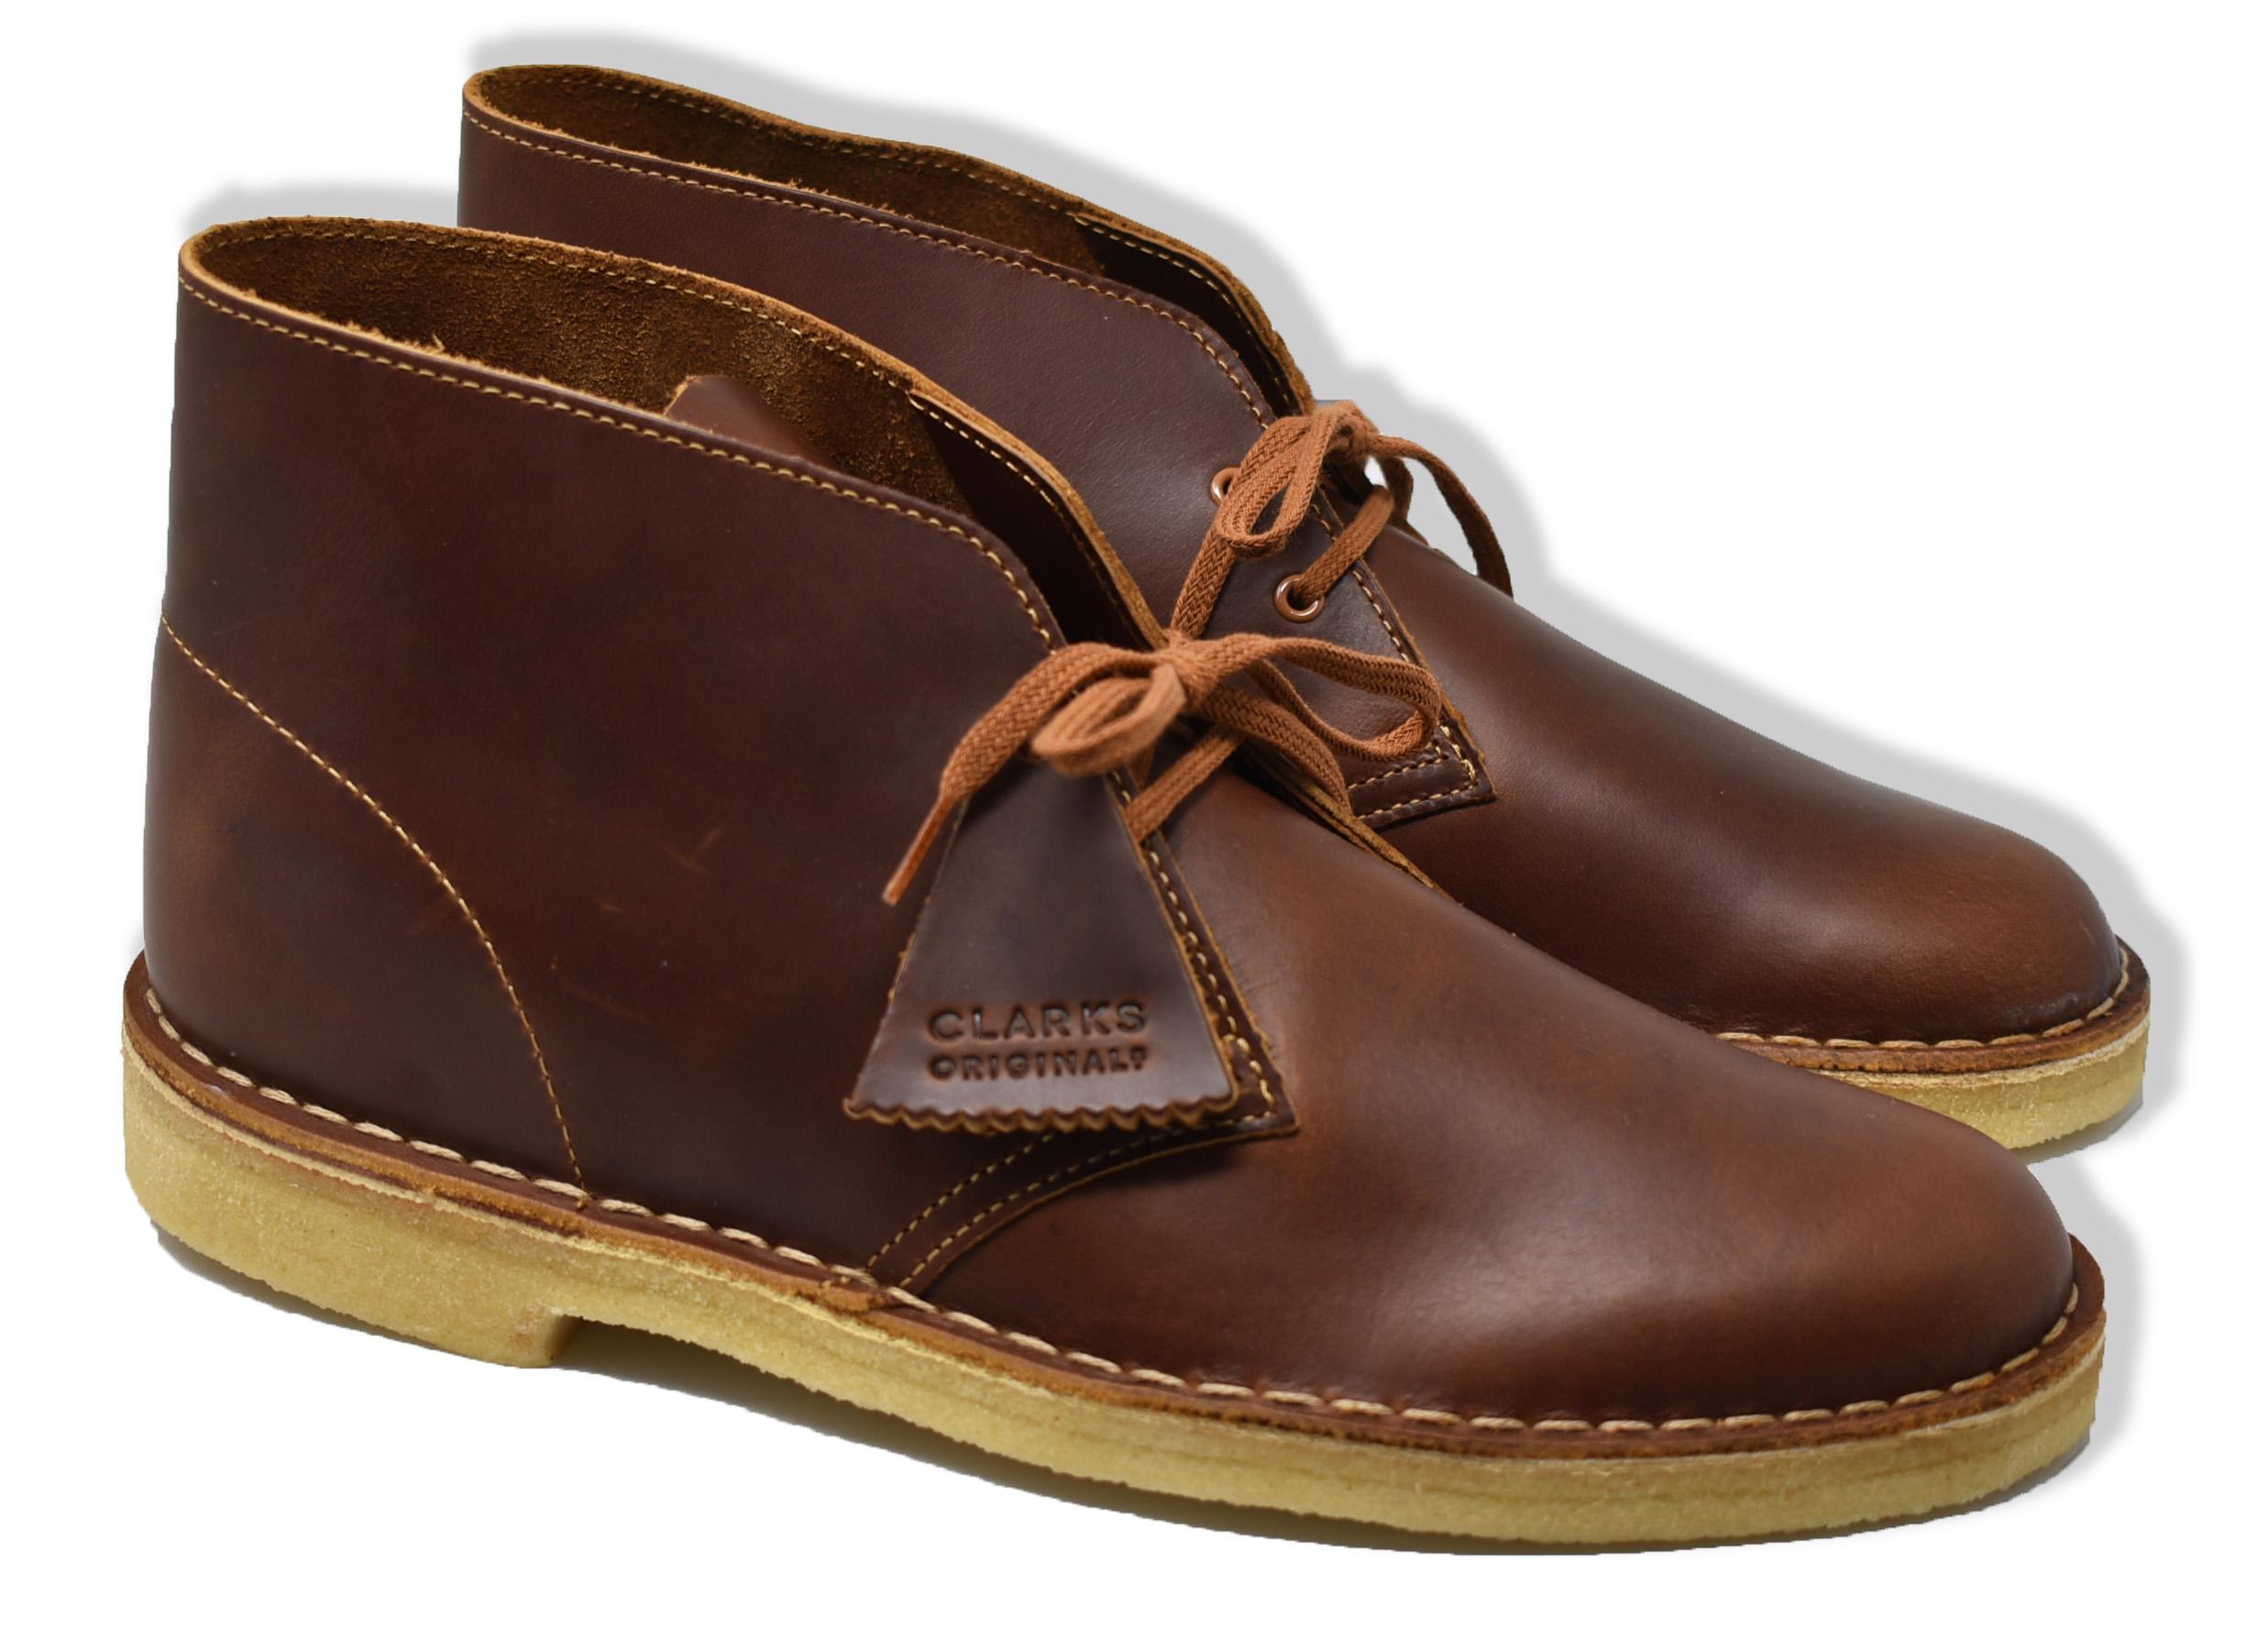 clarks desert boots tan leather